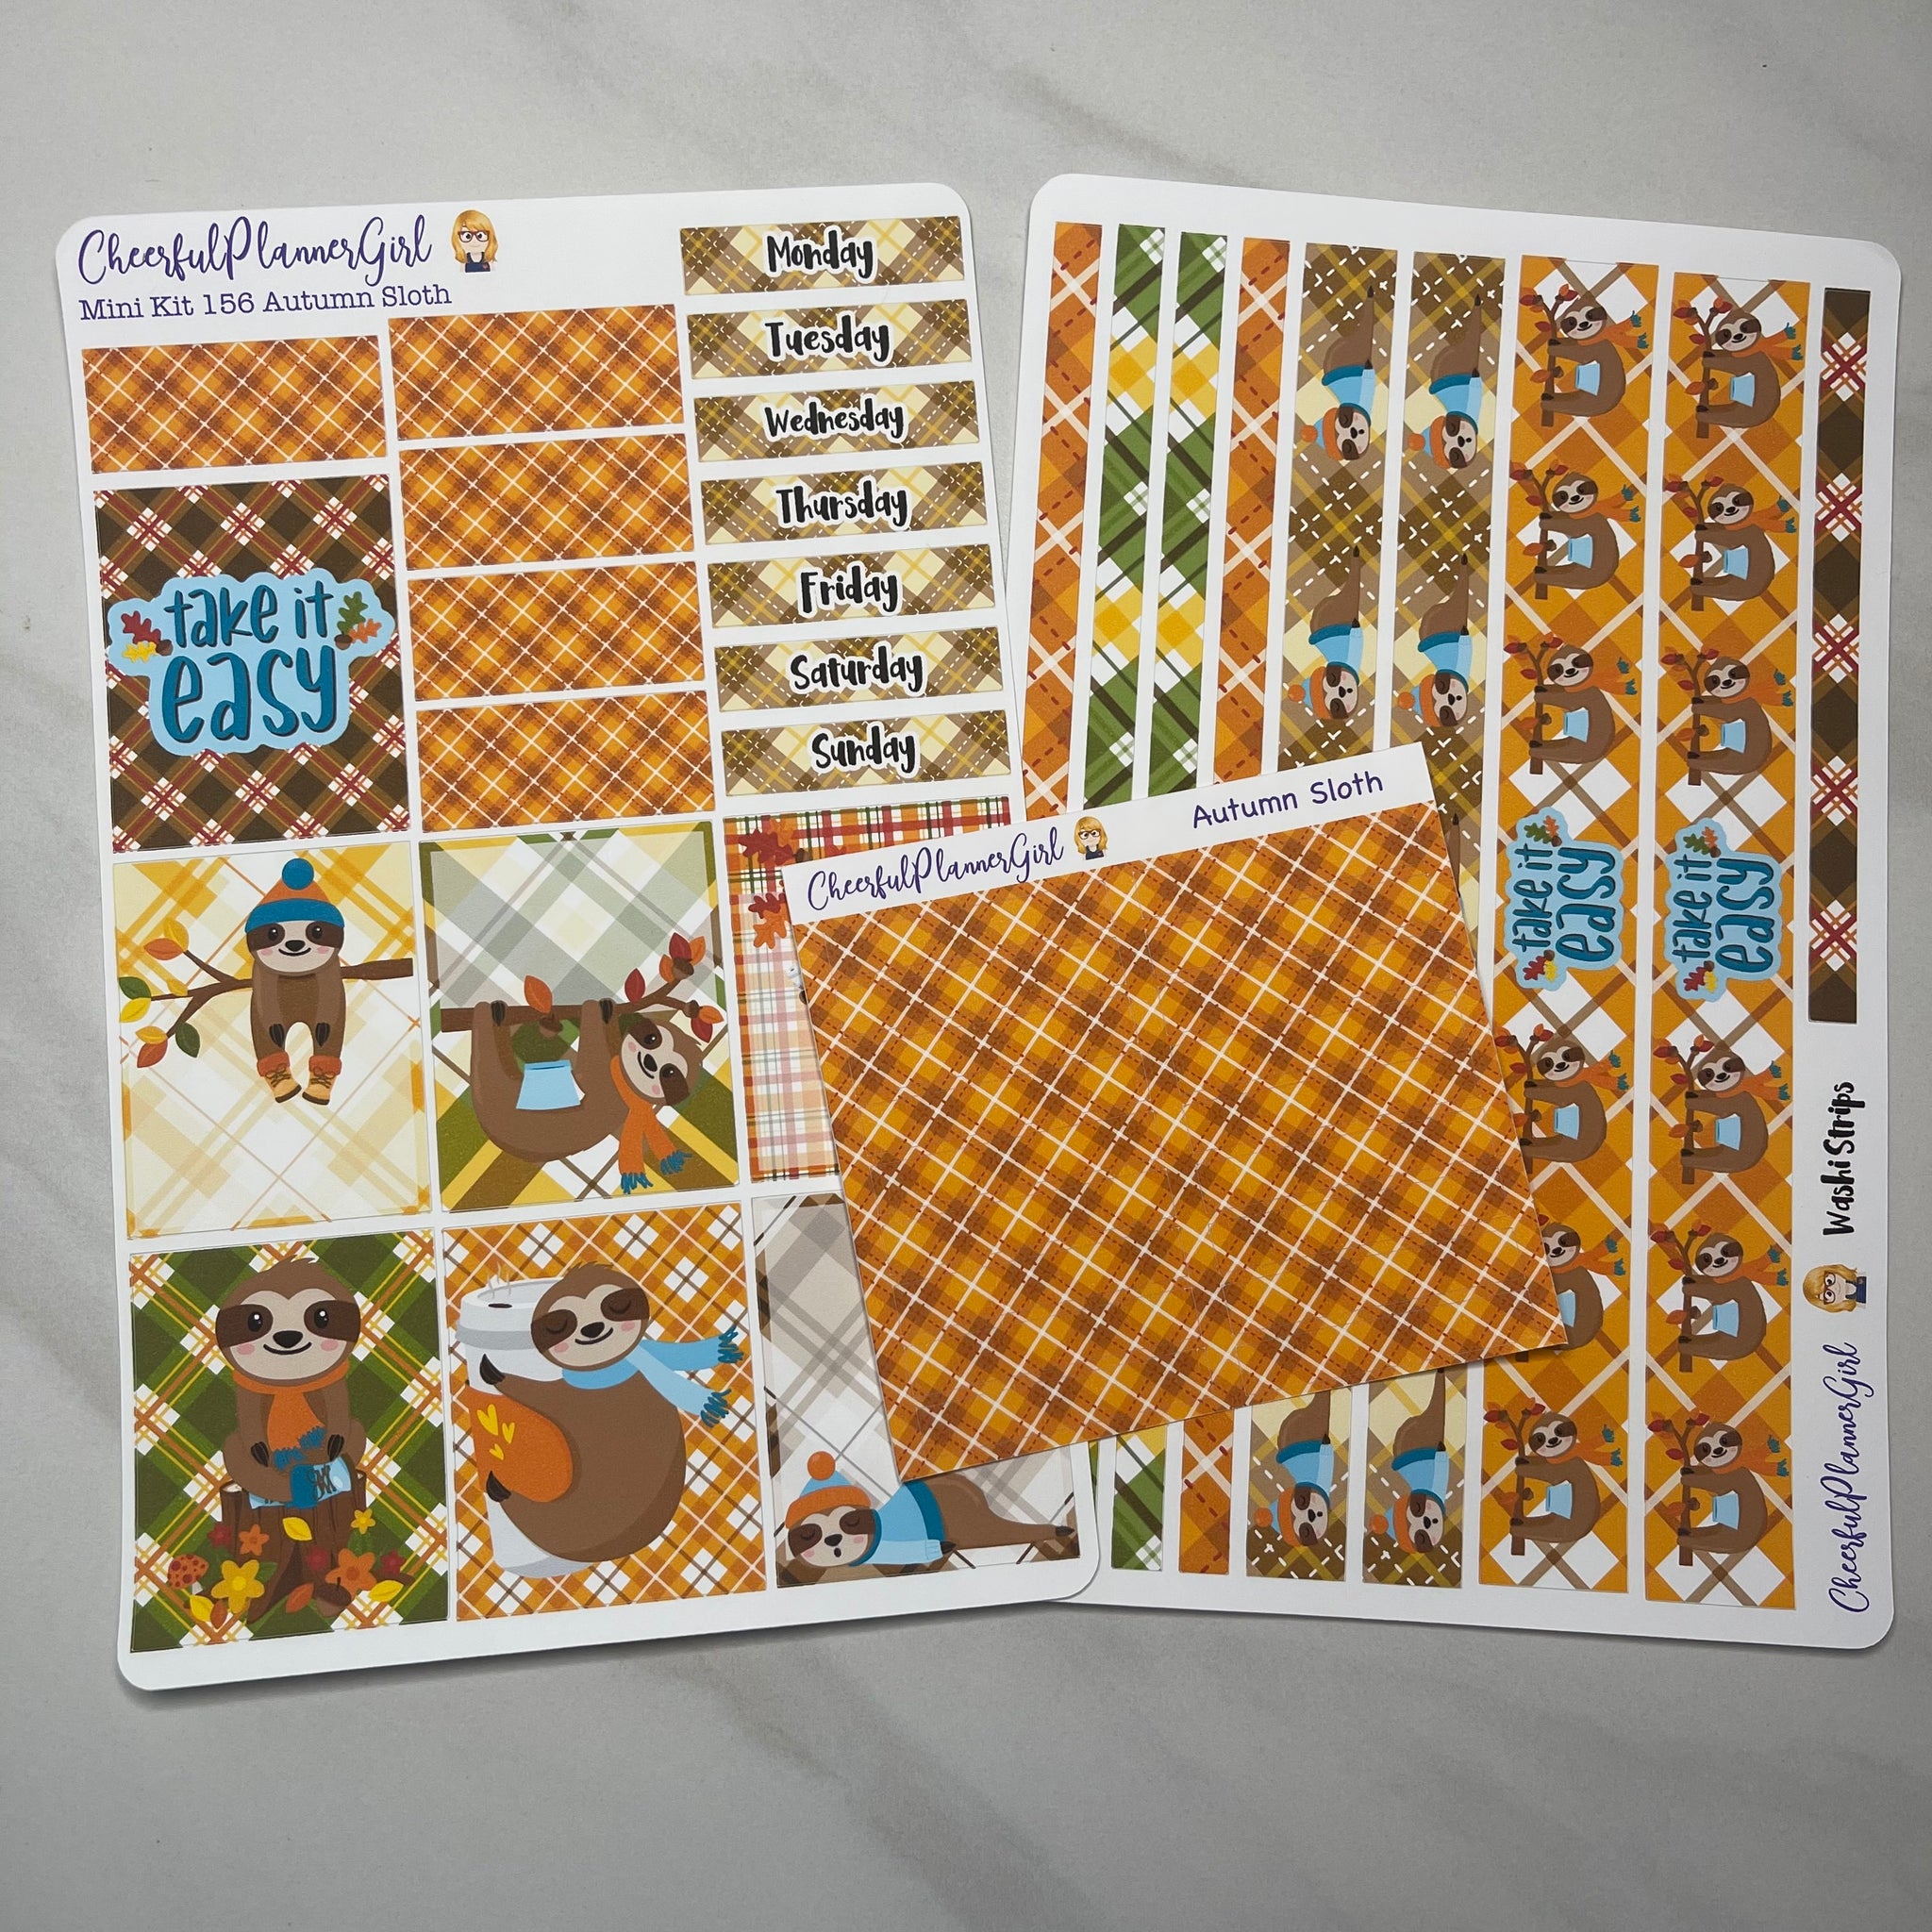 Autumn Sloth Take it Easy with Extras Weekly Layout Planner Stickers